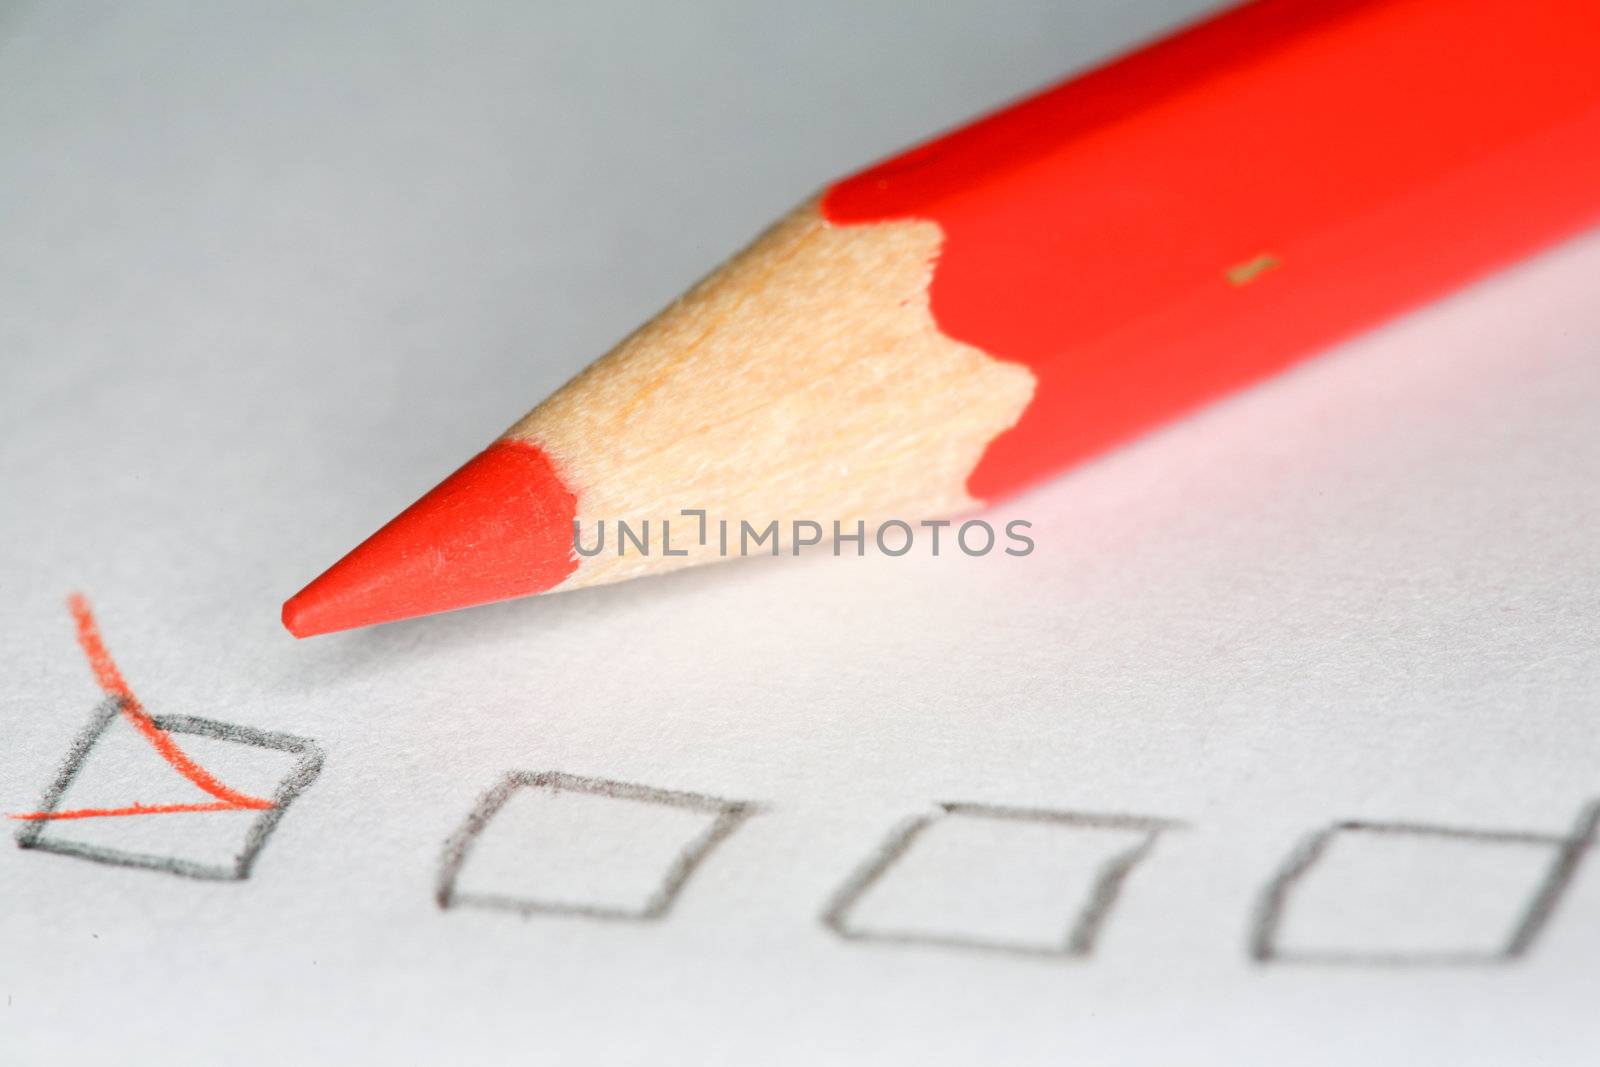 An image of color pencil checking a box